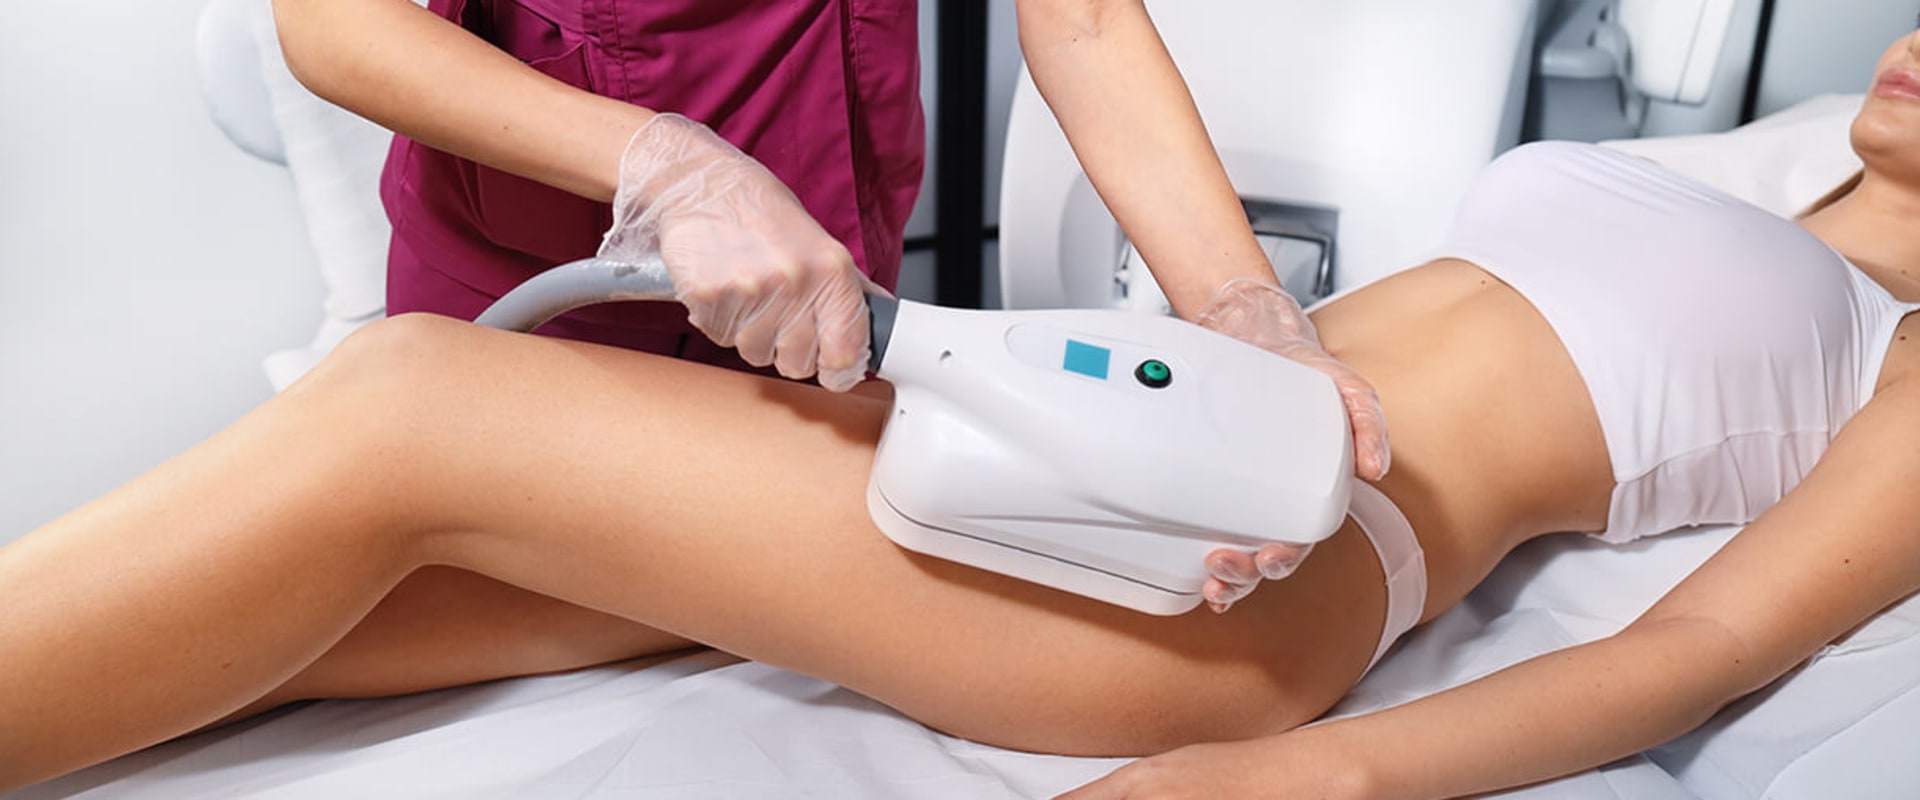 The Most Popular Non-Invasive Fat Reduction Treatments